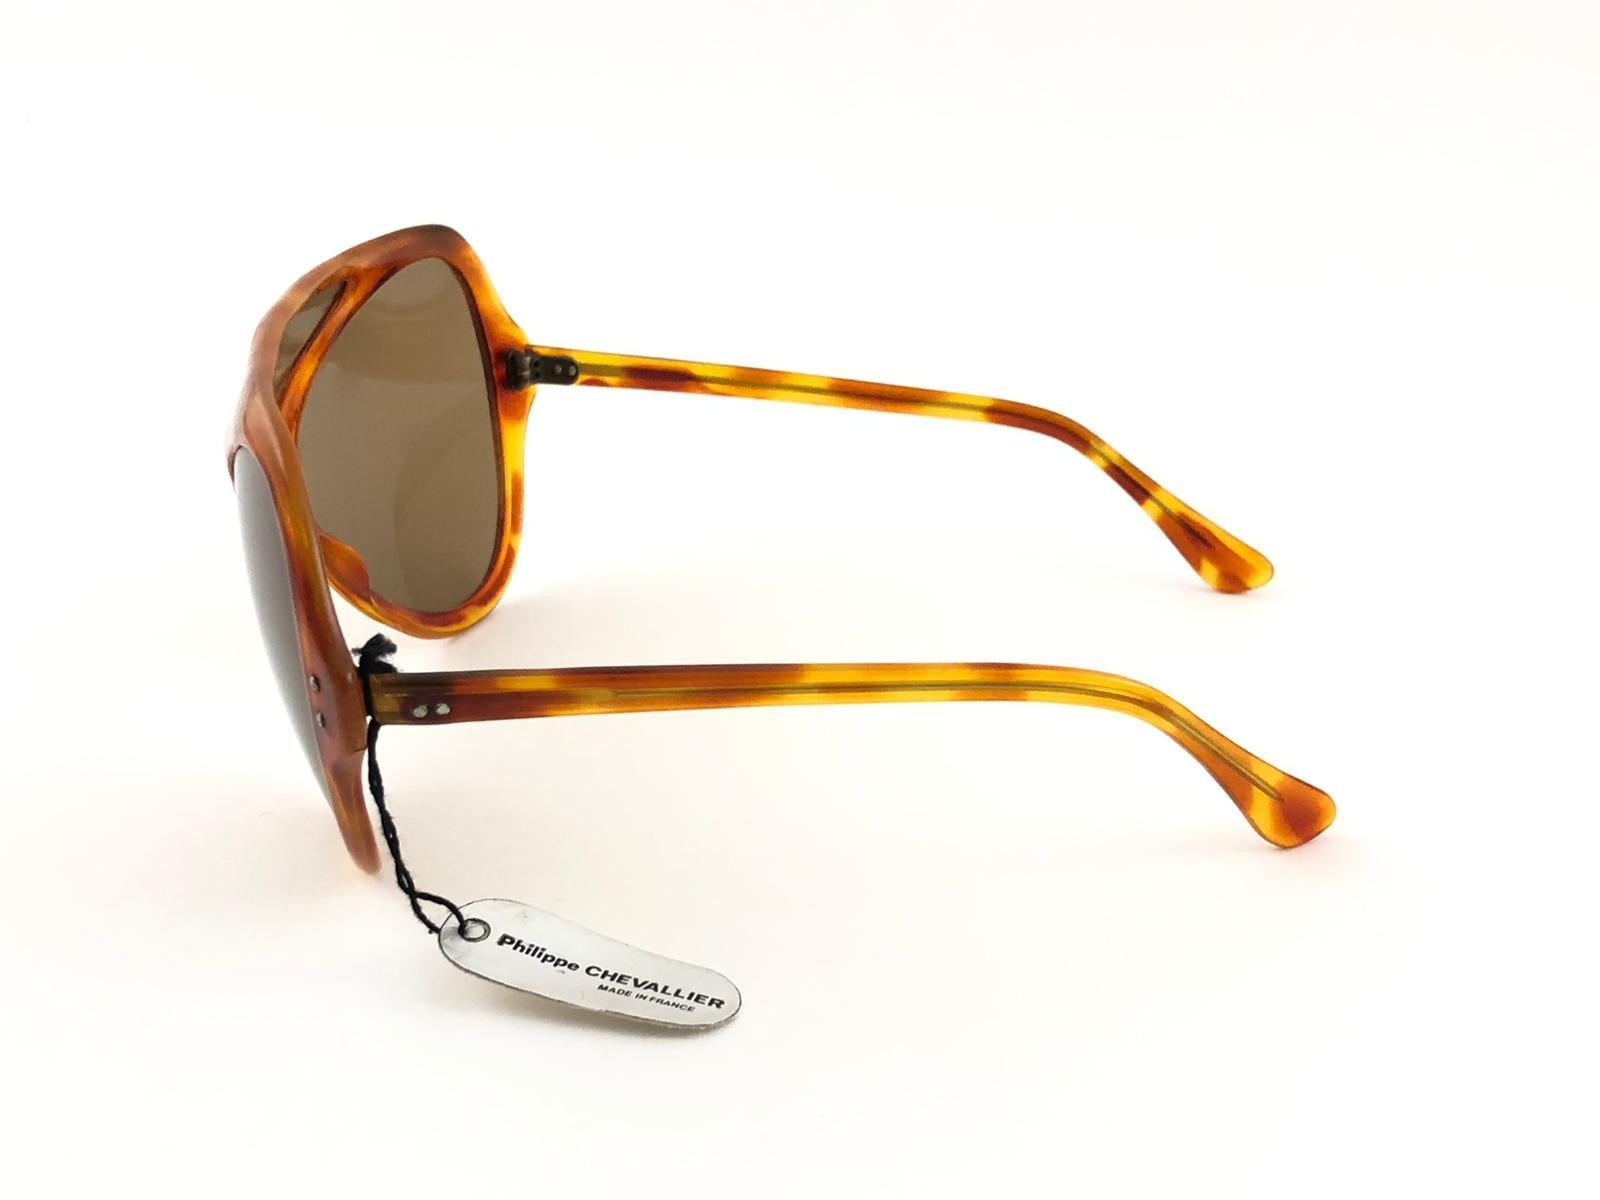 New Vintage Philippe Chevallier III Light Tortoise Miles Davis 1960 Sunglasses In New Condition For Sale In Baleares, Baleares